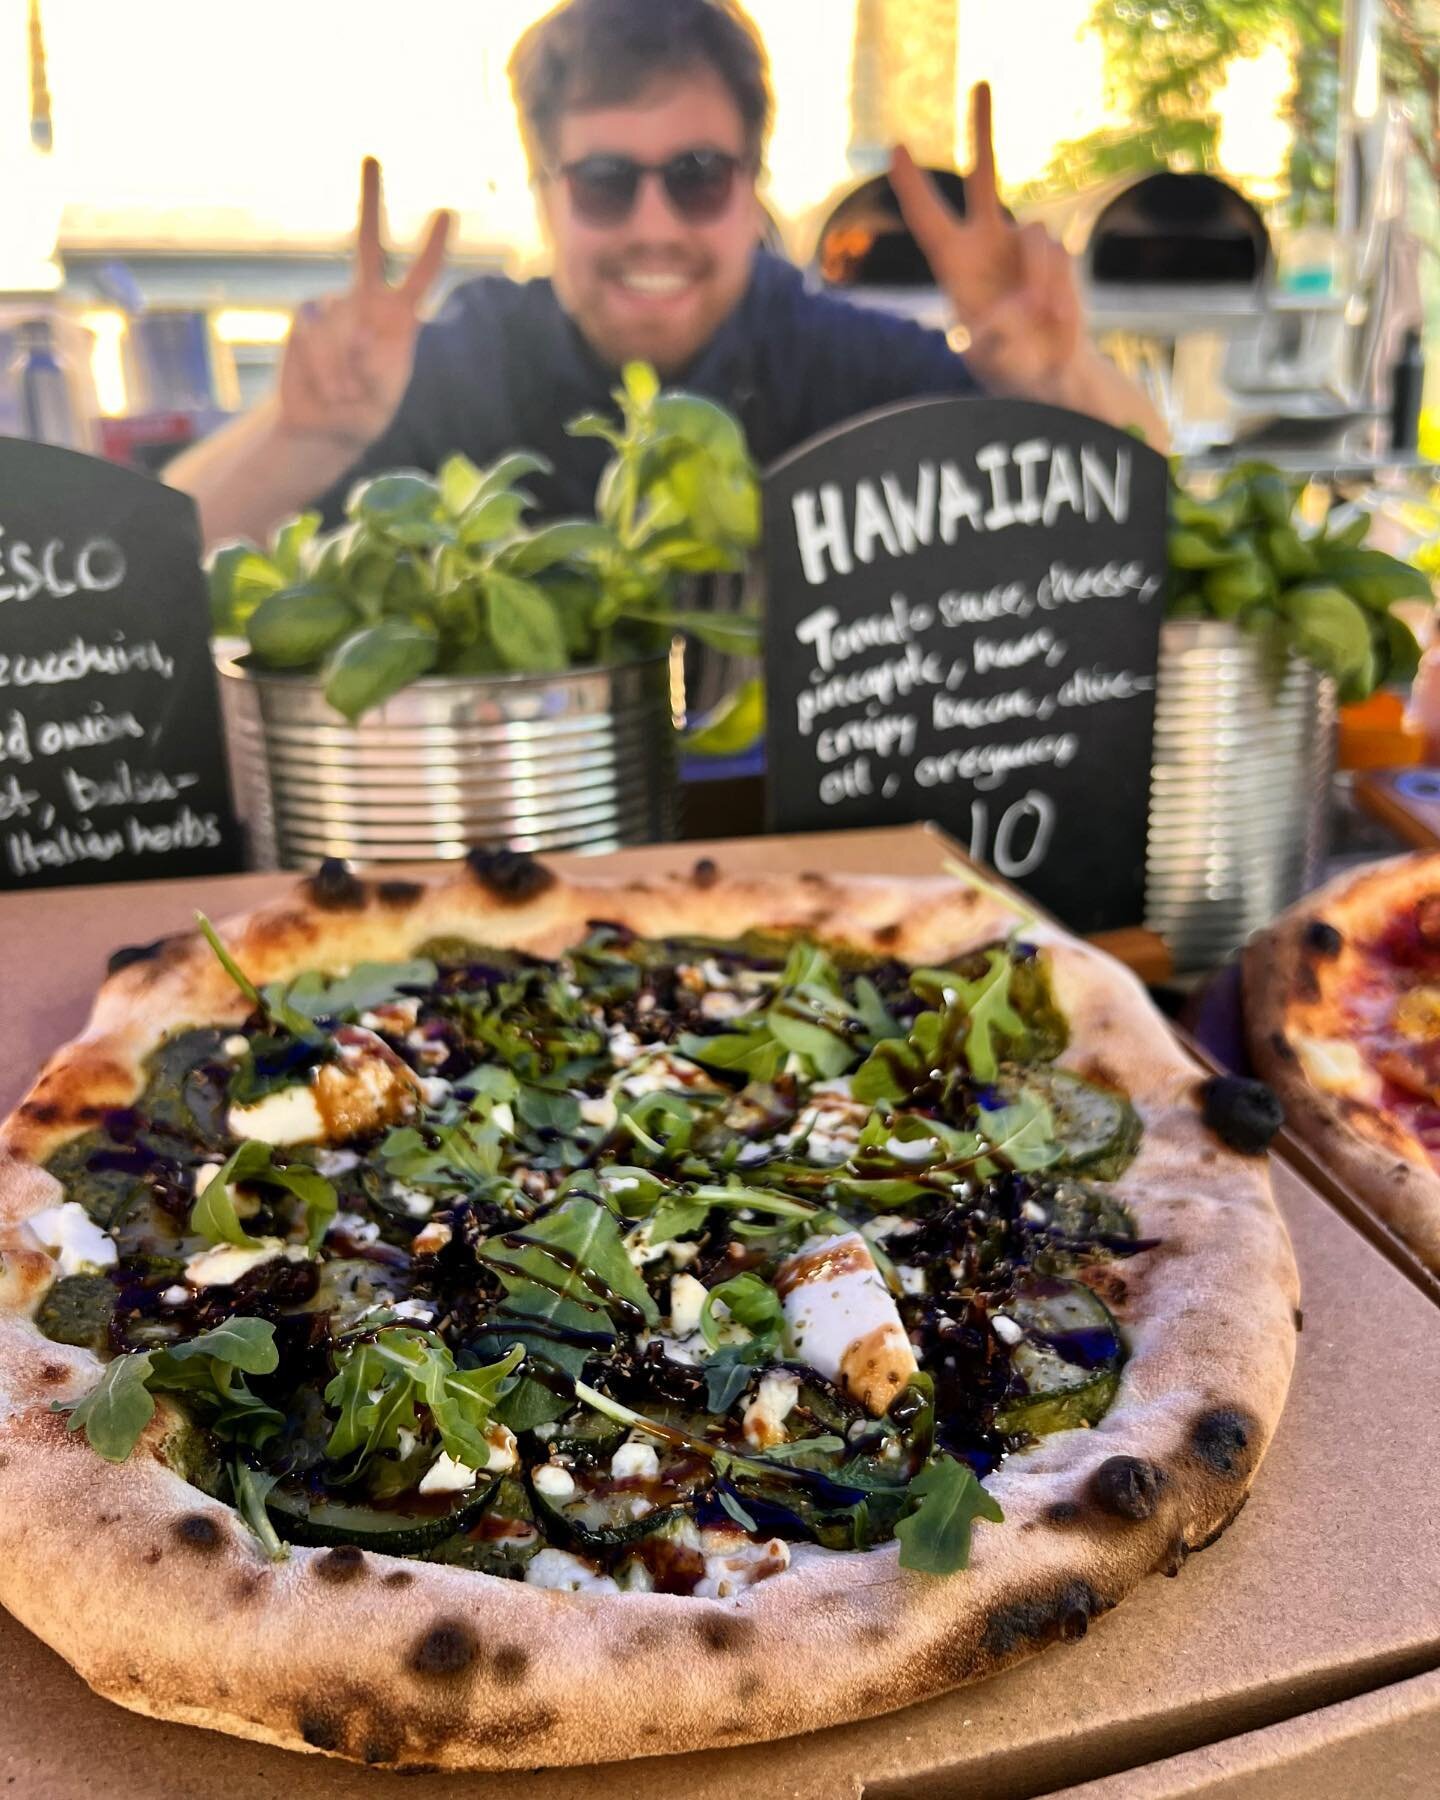 It&rsquo;s Pesto Al Fresco weather folks! We&rsquo;ve made some changes to this in recent weeks, we&rsquo;ve doubled down on the green and added some rocket power 🍃, the balsamic glaze is a must with summer time pizzas so we&rsquo;re smashing that o